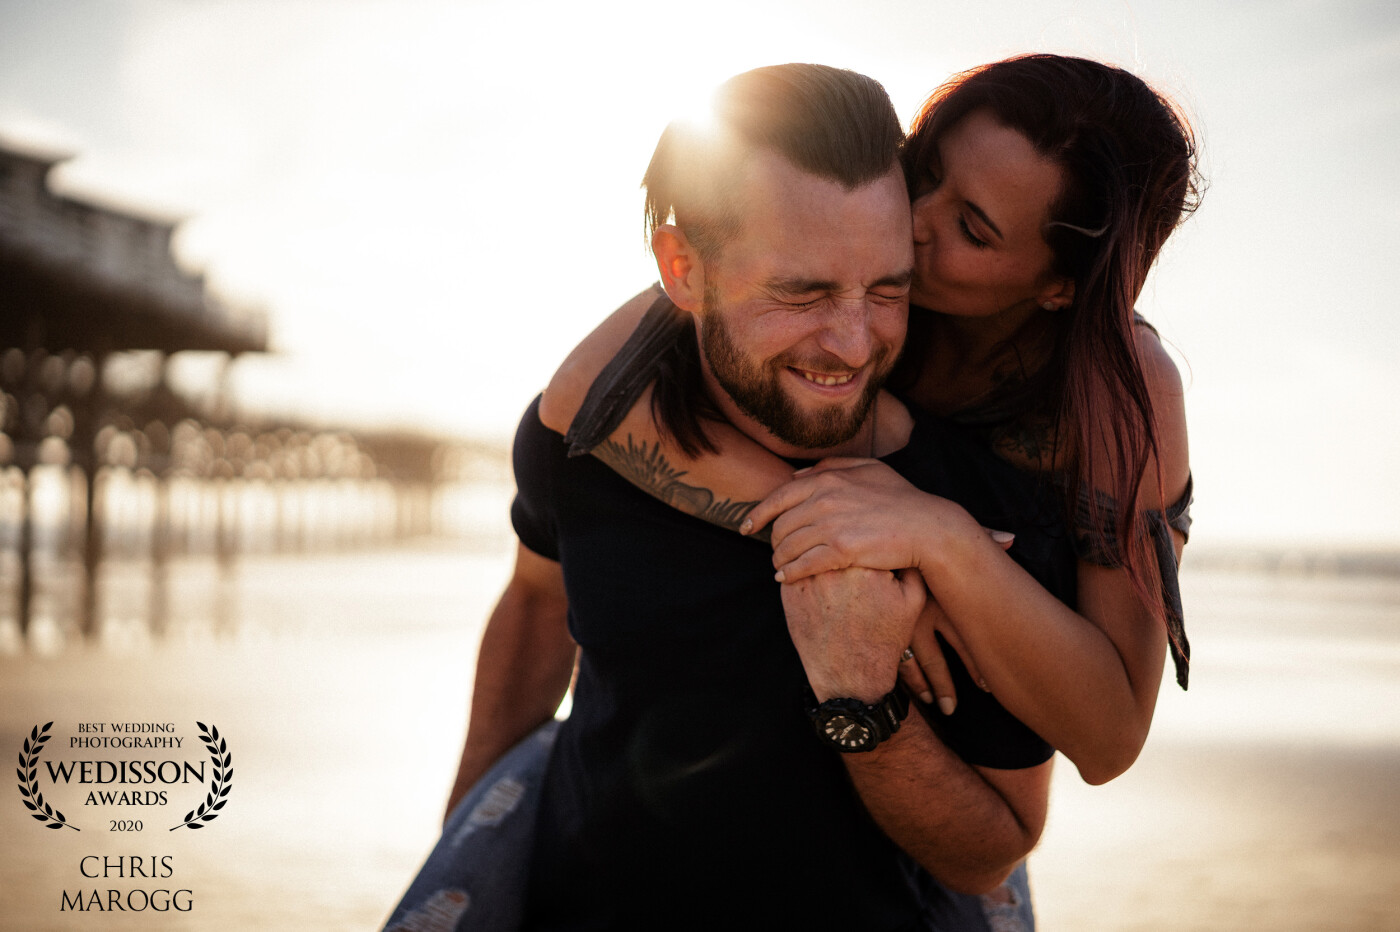 During our language stay in San Diego we met Kat & Jacob and did a couple shooting with them at the pier in Pacific Beach. <br />
For us Swiss, the ocean and the beautiful sunsets were simply a highlight. 